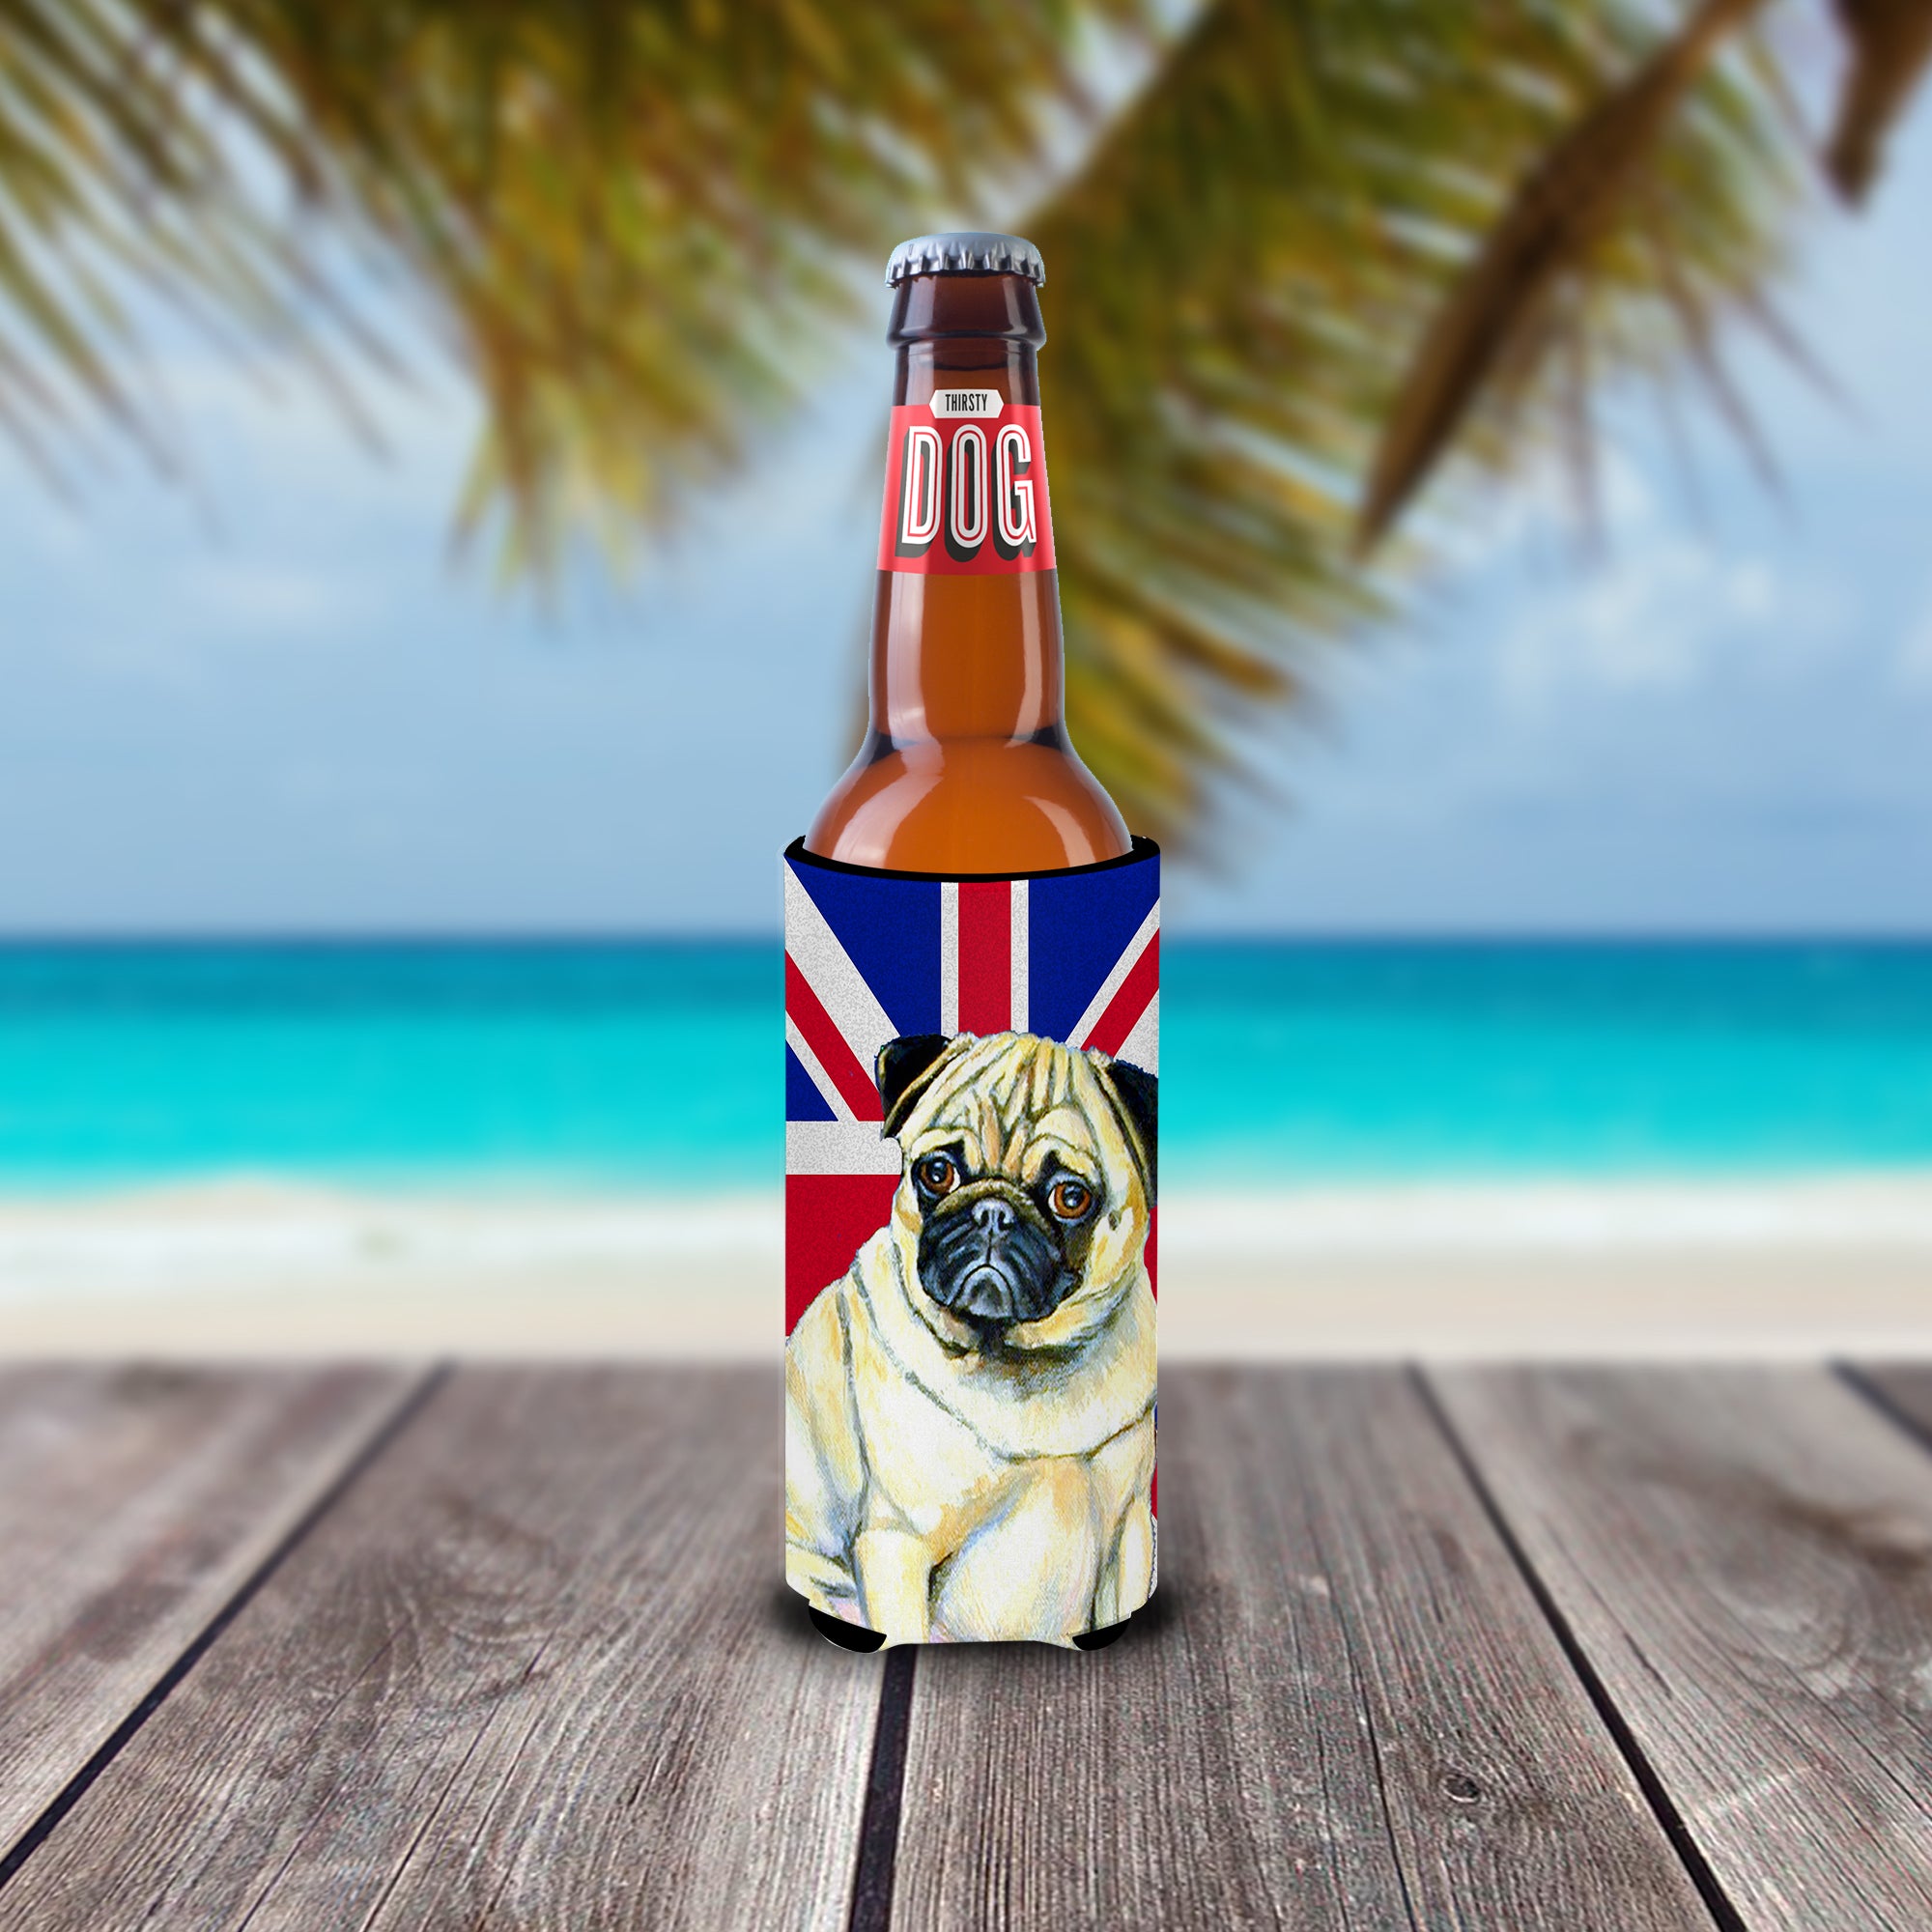 Pug with English Union Jack British Flag Ultra Beverage Insulators for slim cans LH9494MUK